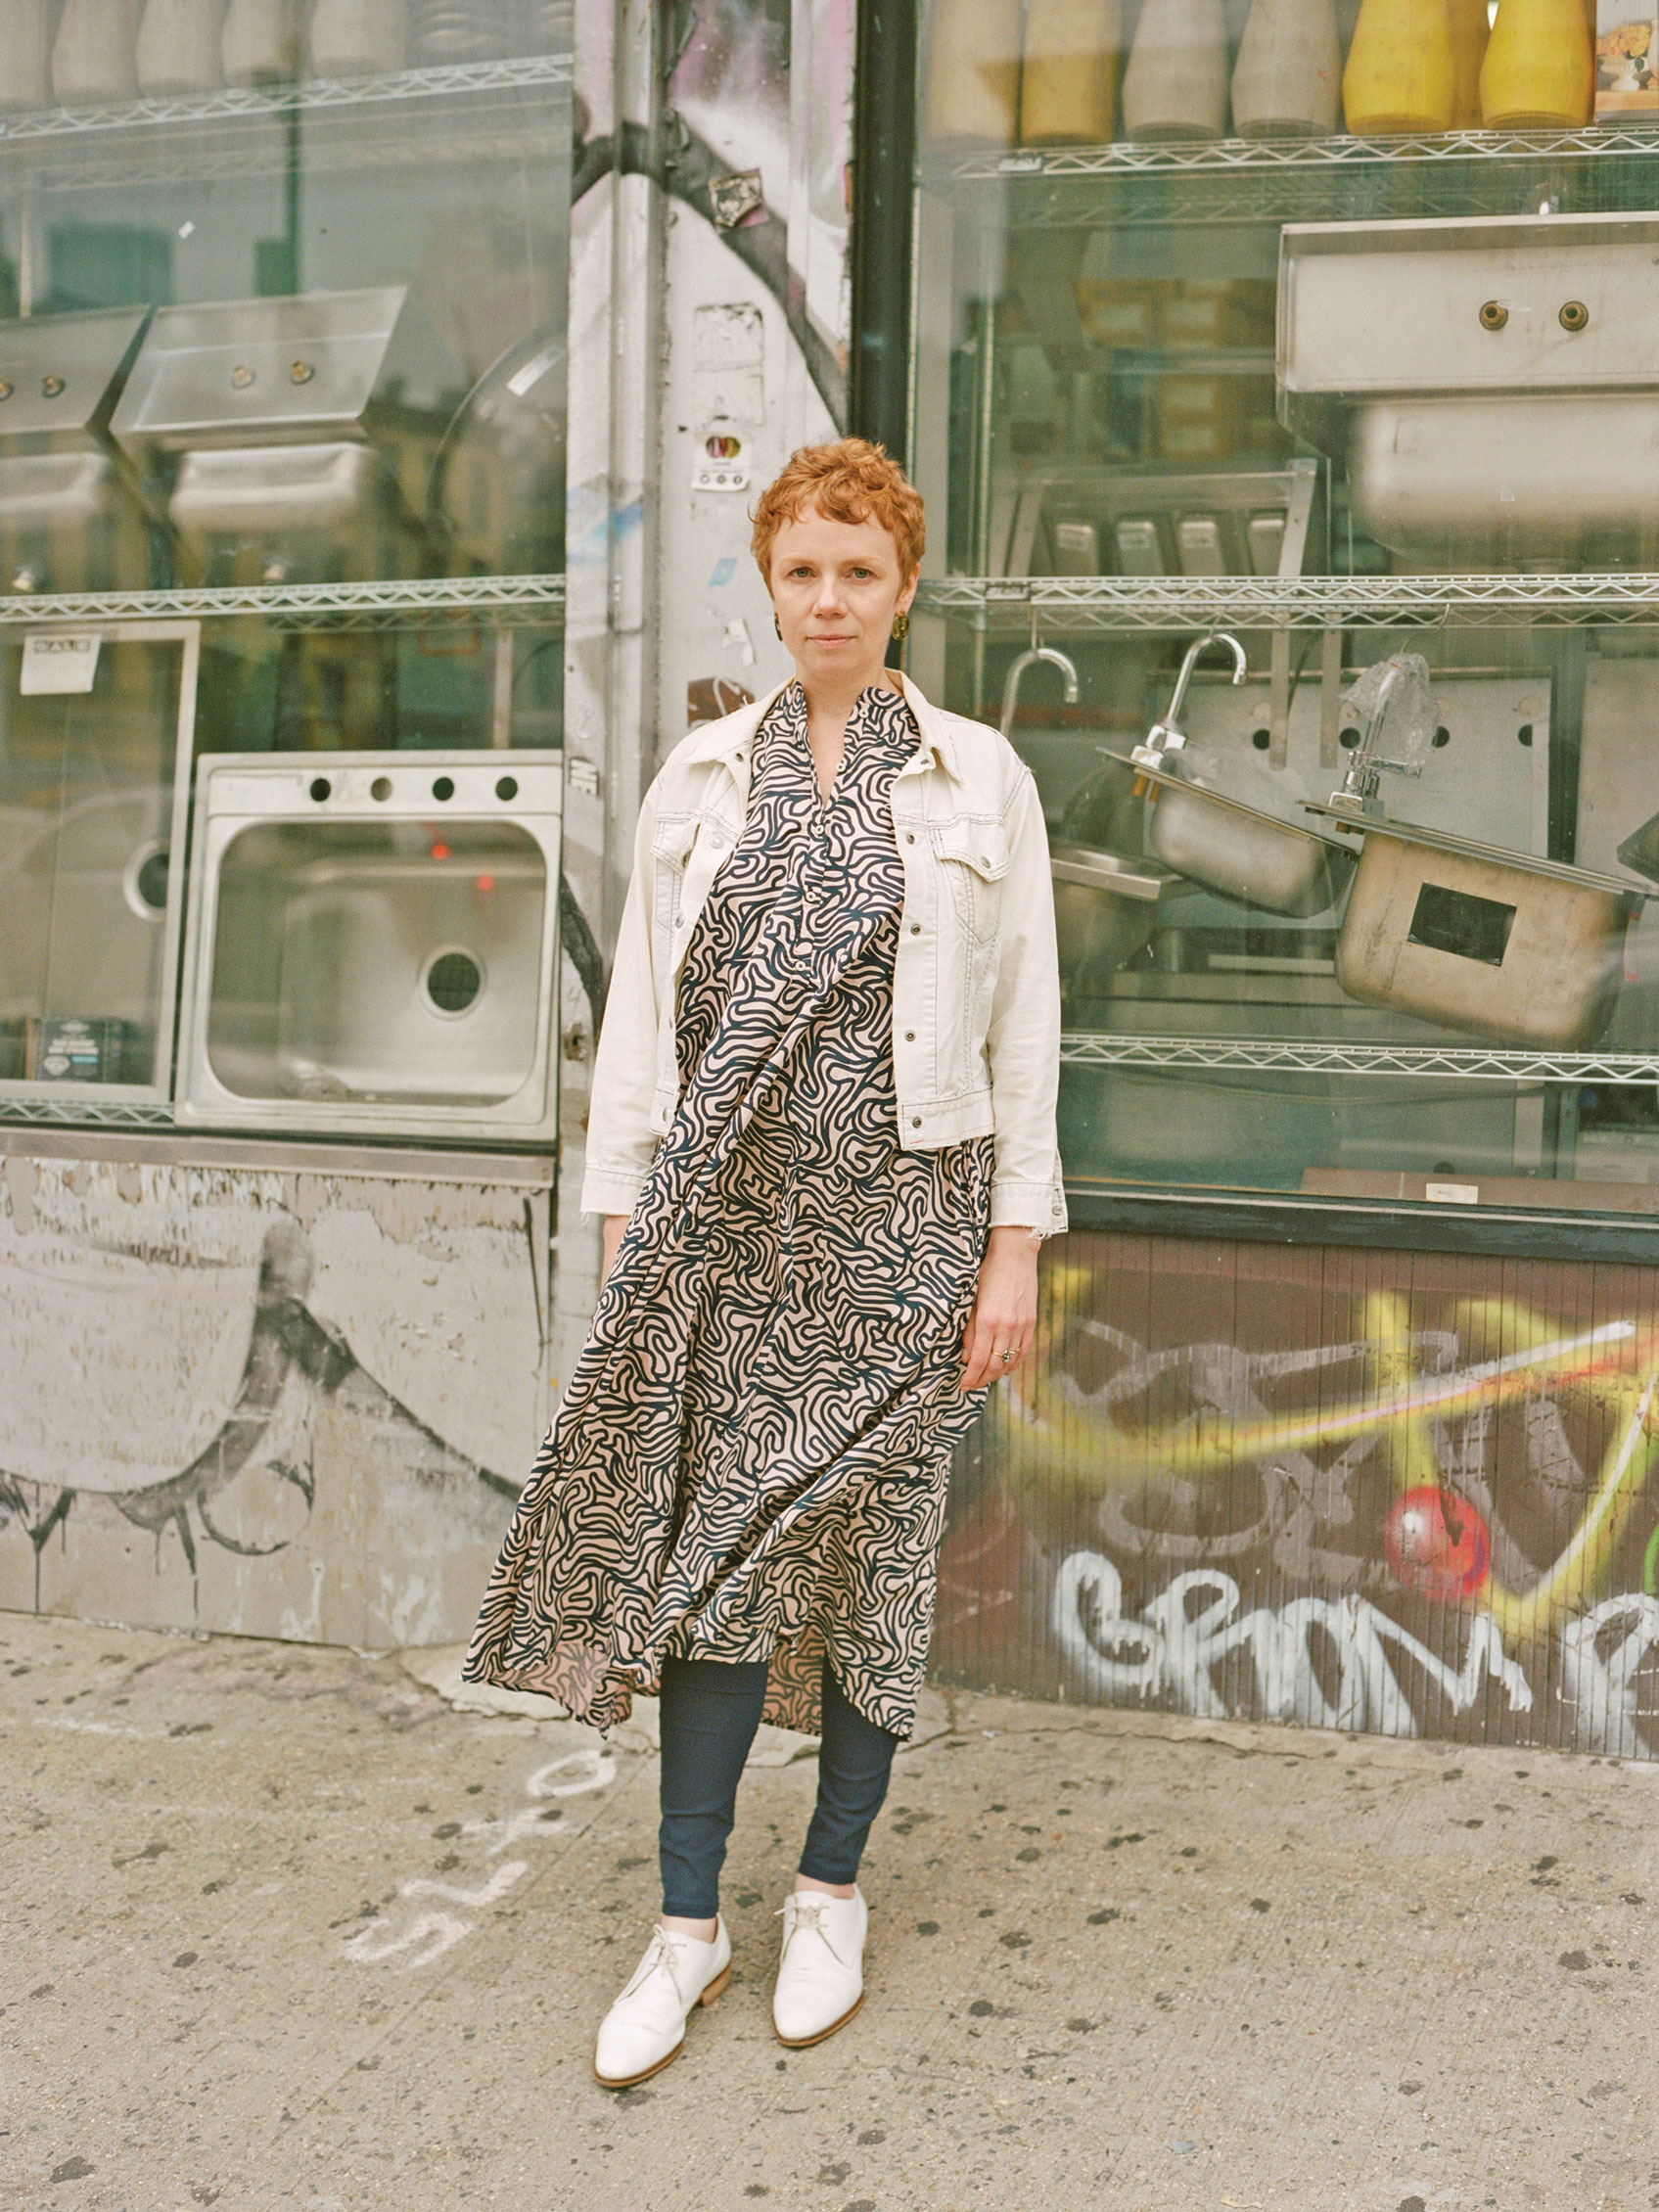 Natalie Bell on the Bowery, 2019. Photo by Jeff Henrikson.